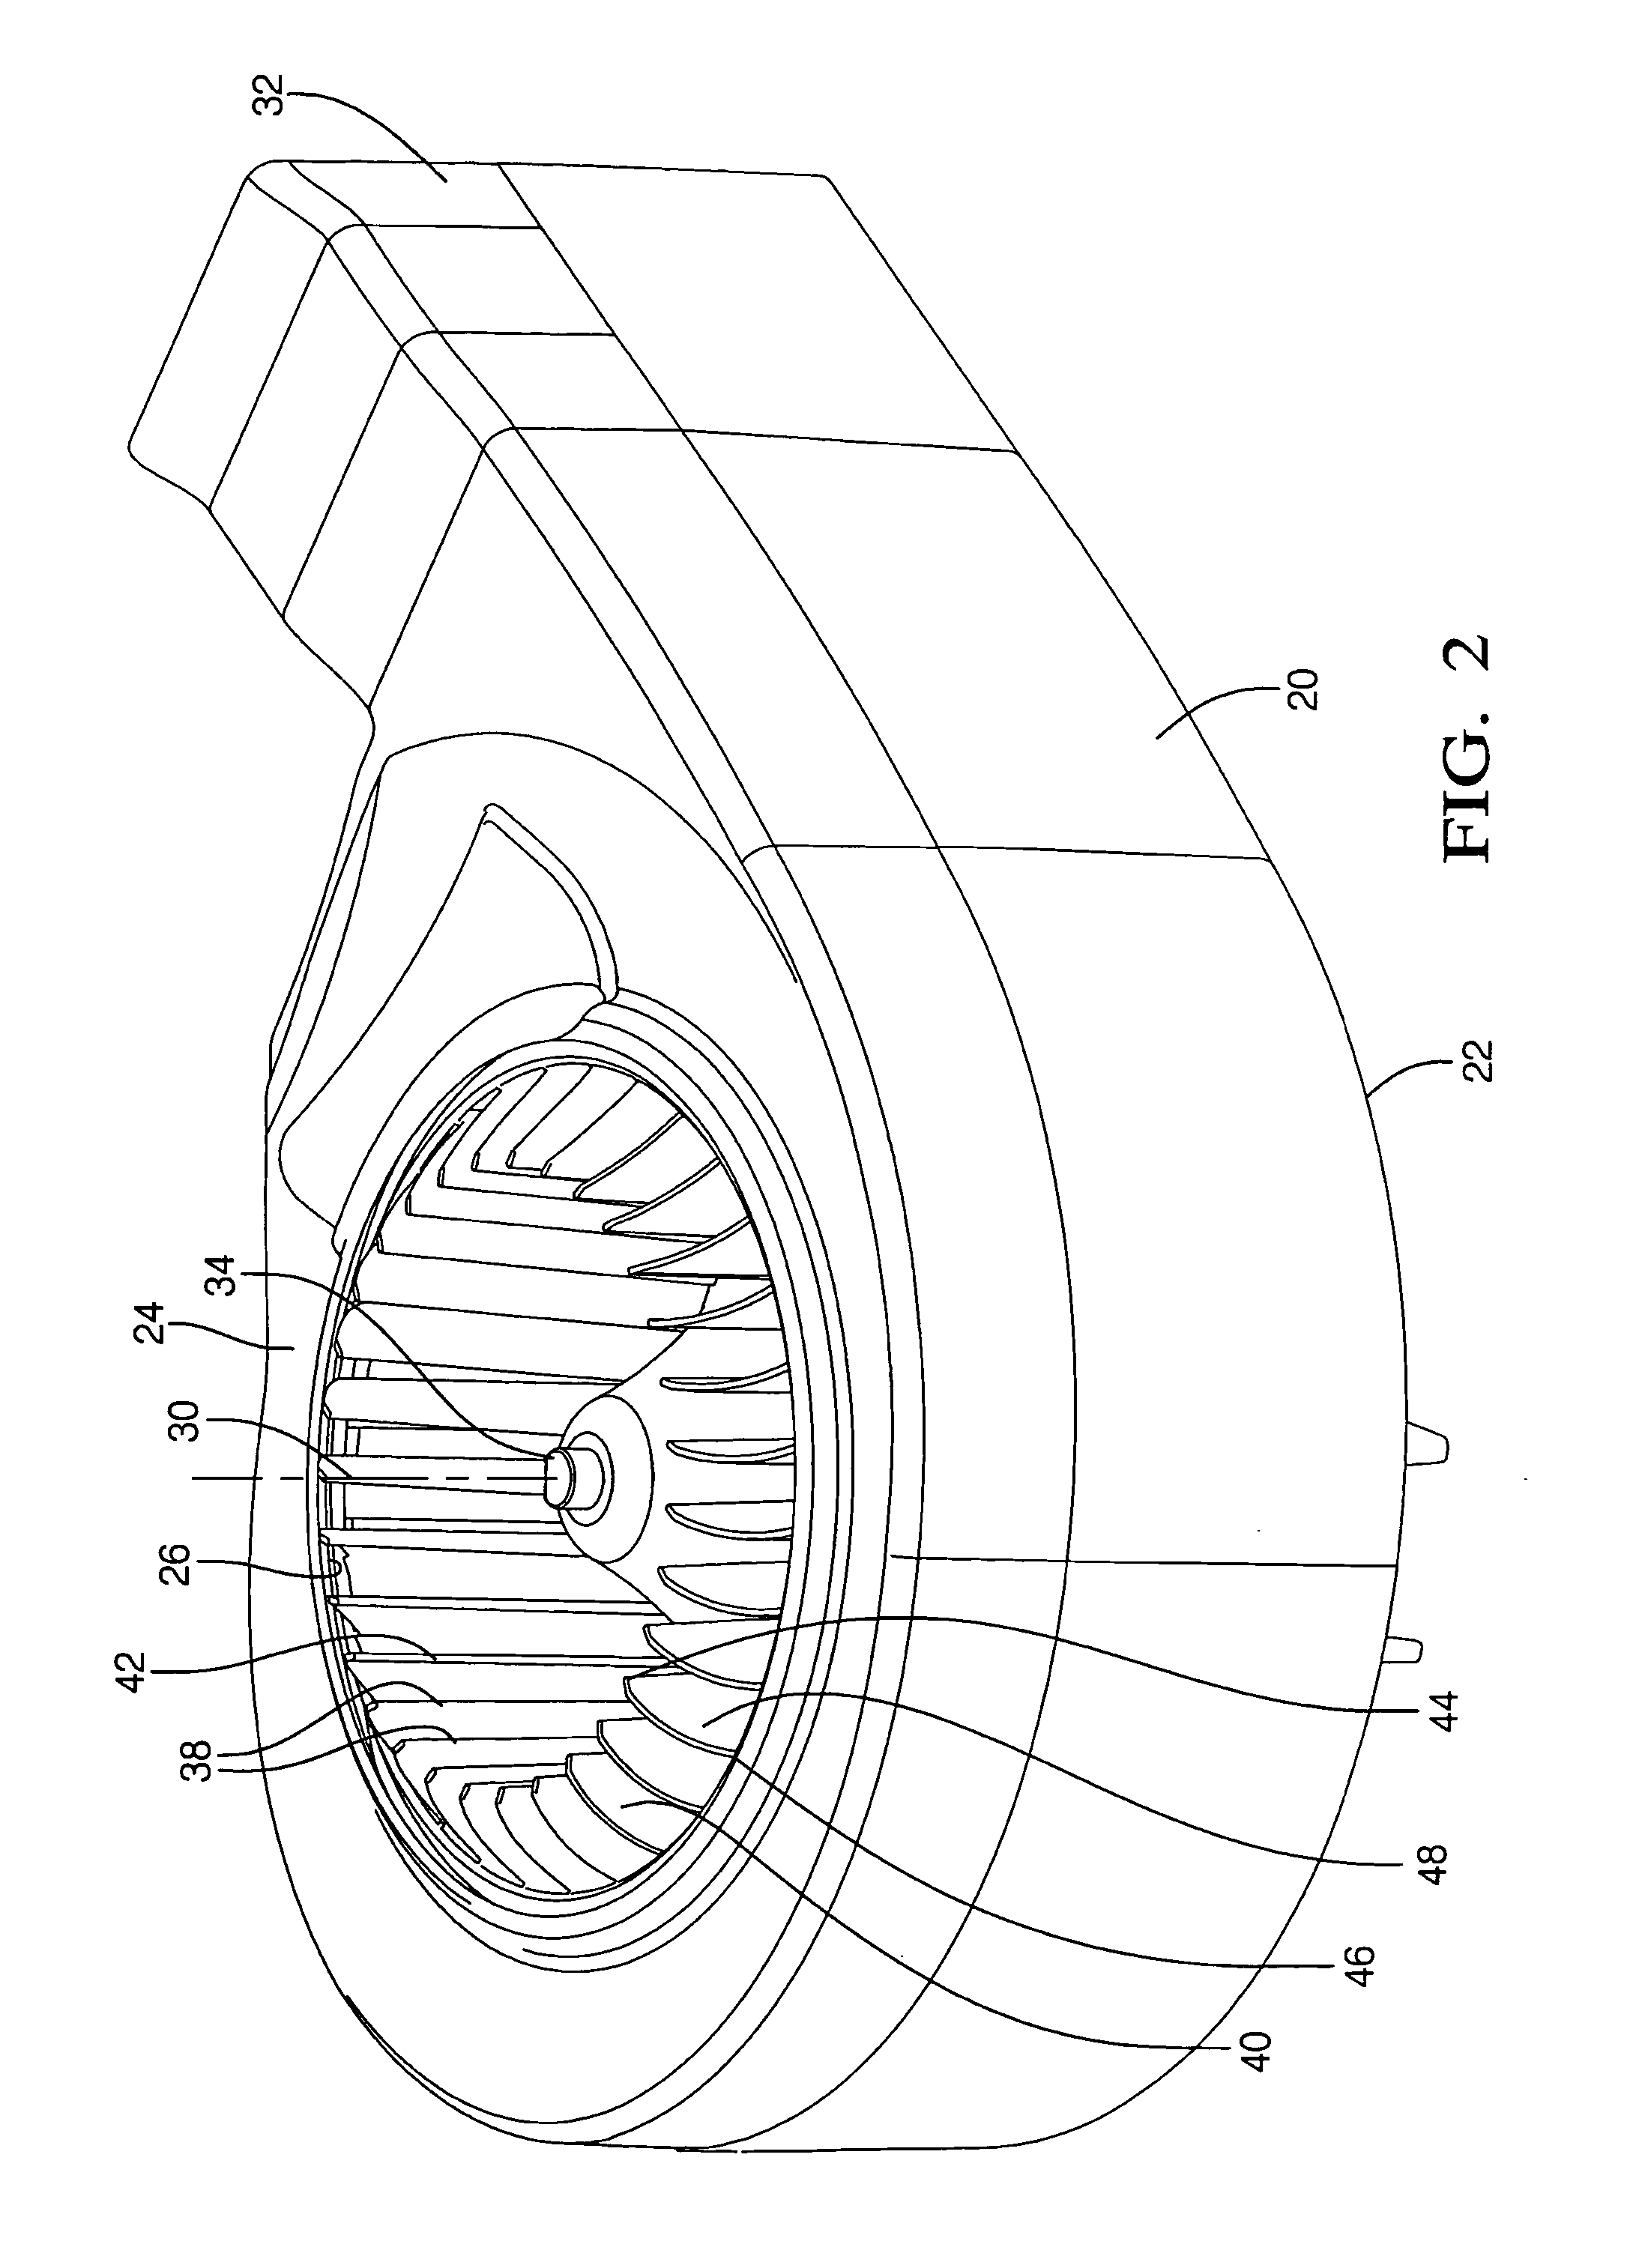 Fan and scroll design for high efficiency and low noise